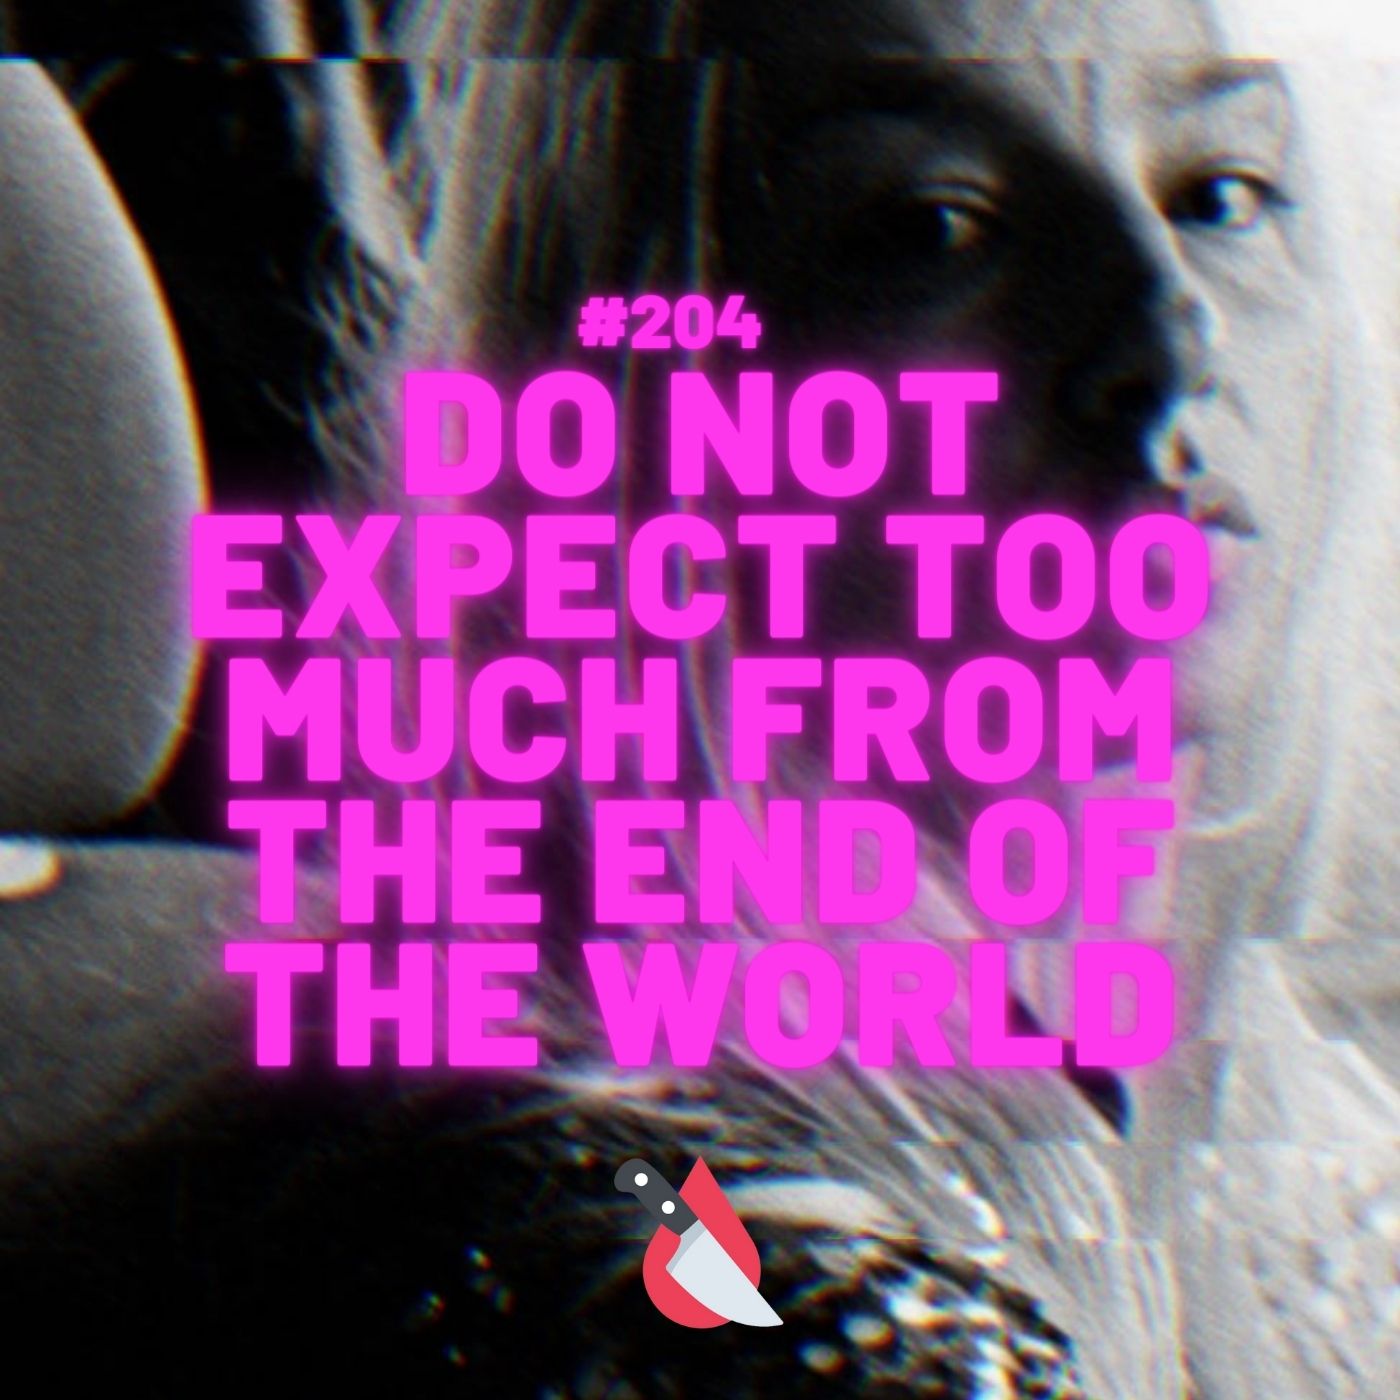 #204 - Do Not Expect Too Much from the End of the World